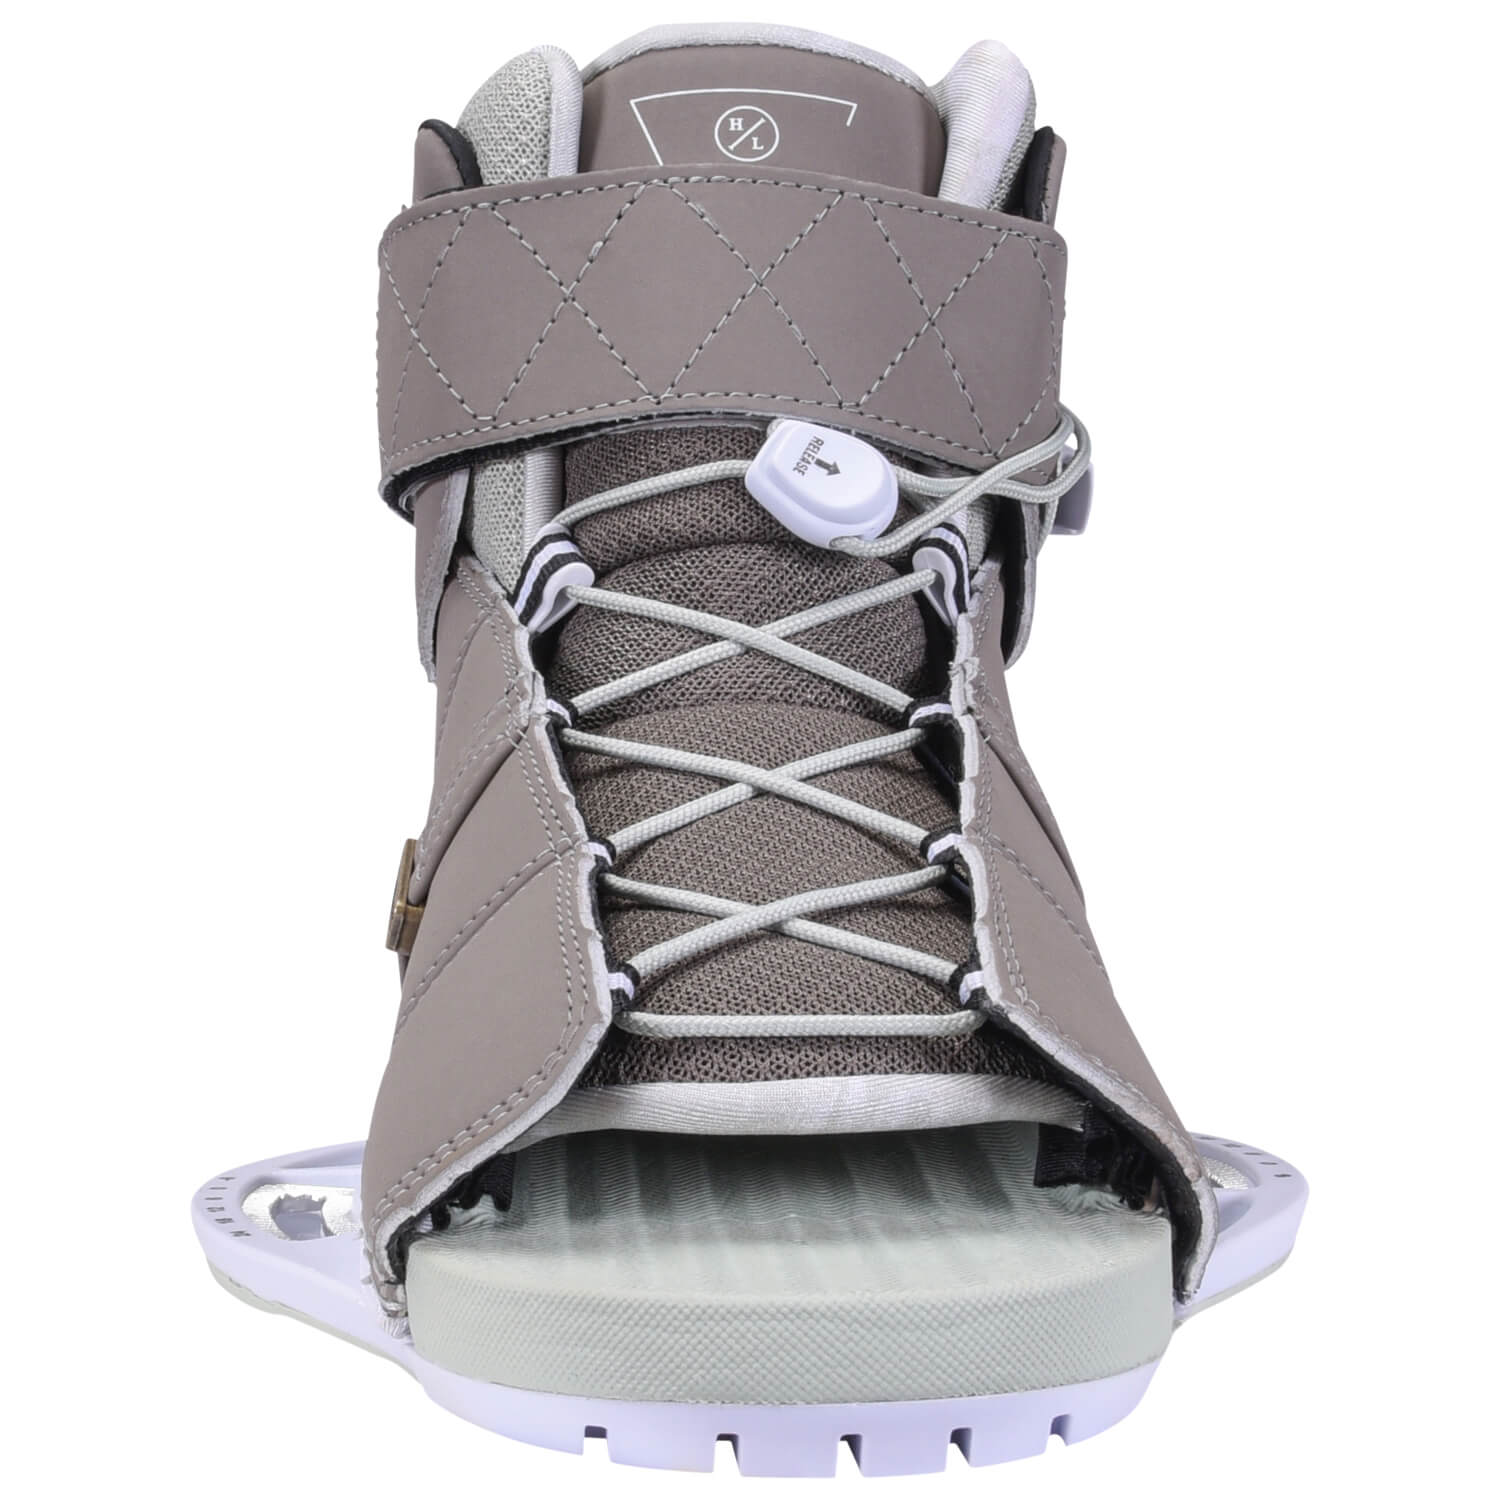 Hyperlite grey boots with customizable feel and support.